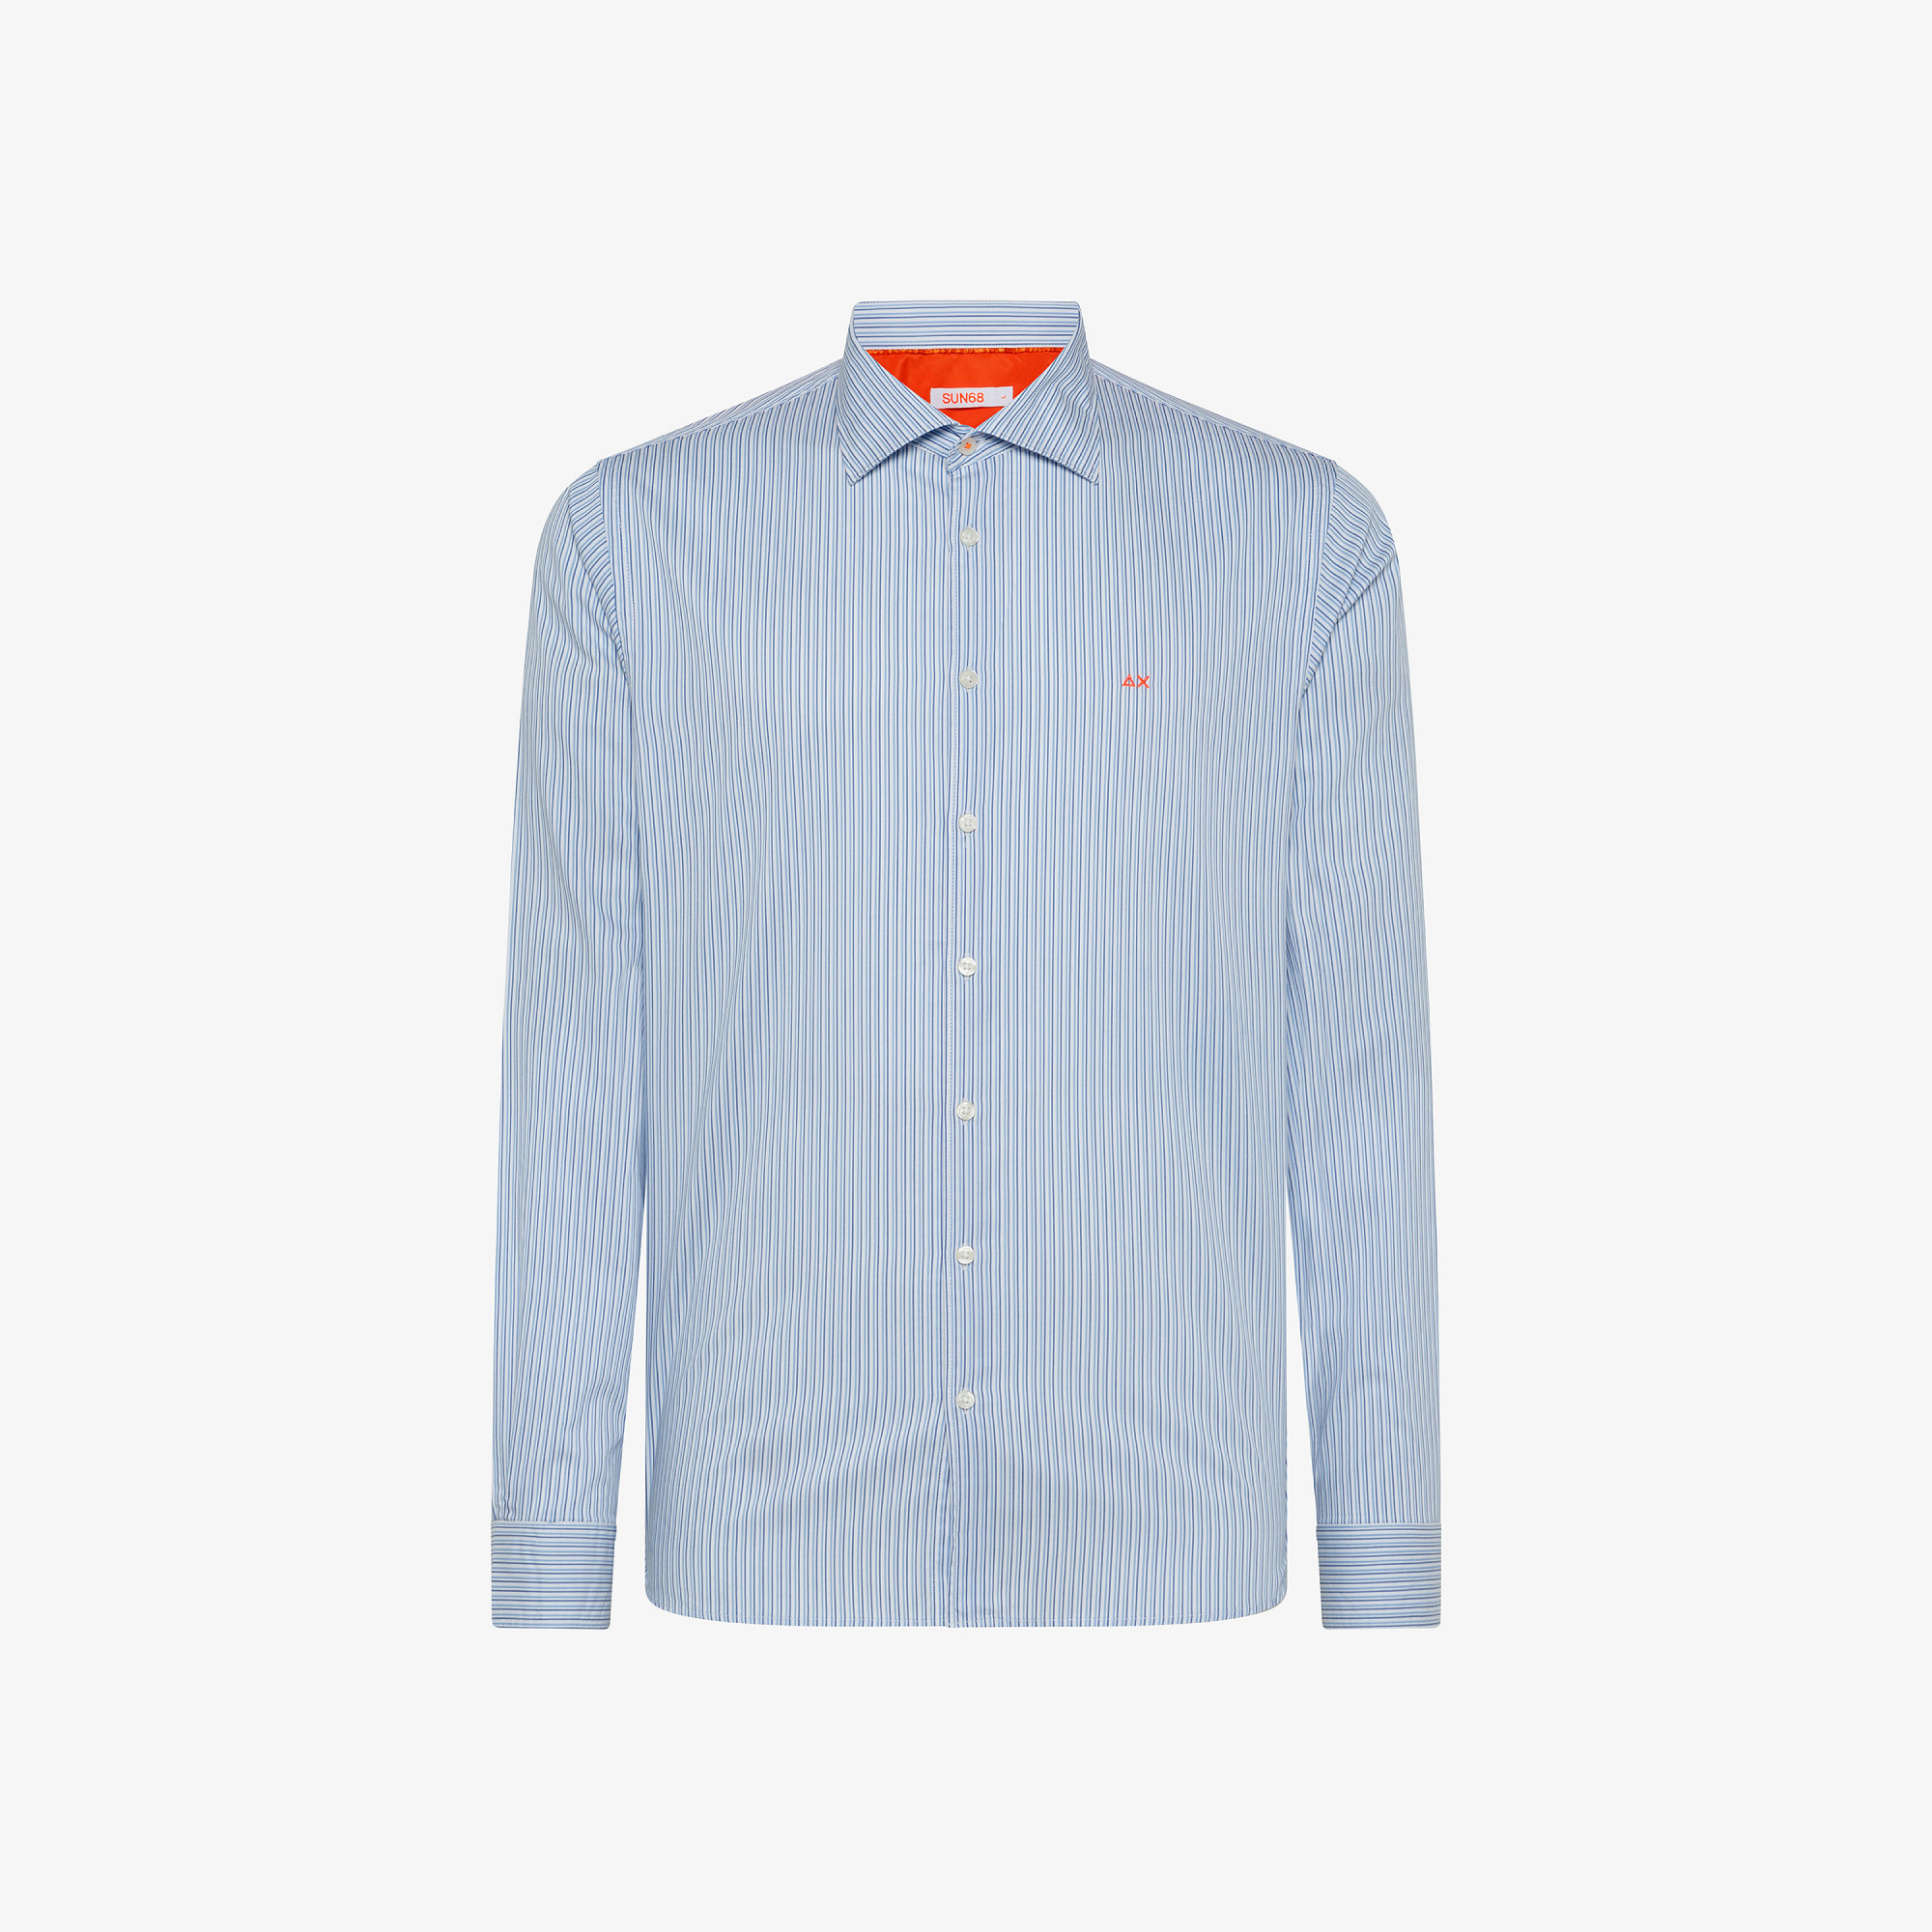 SHIRT CLASSIC STRIPES WITH FLUO DETAIL BIANCO/AZZURRO